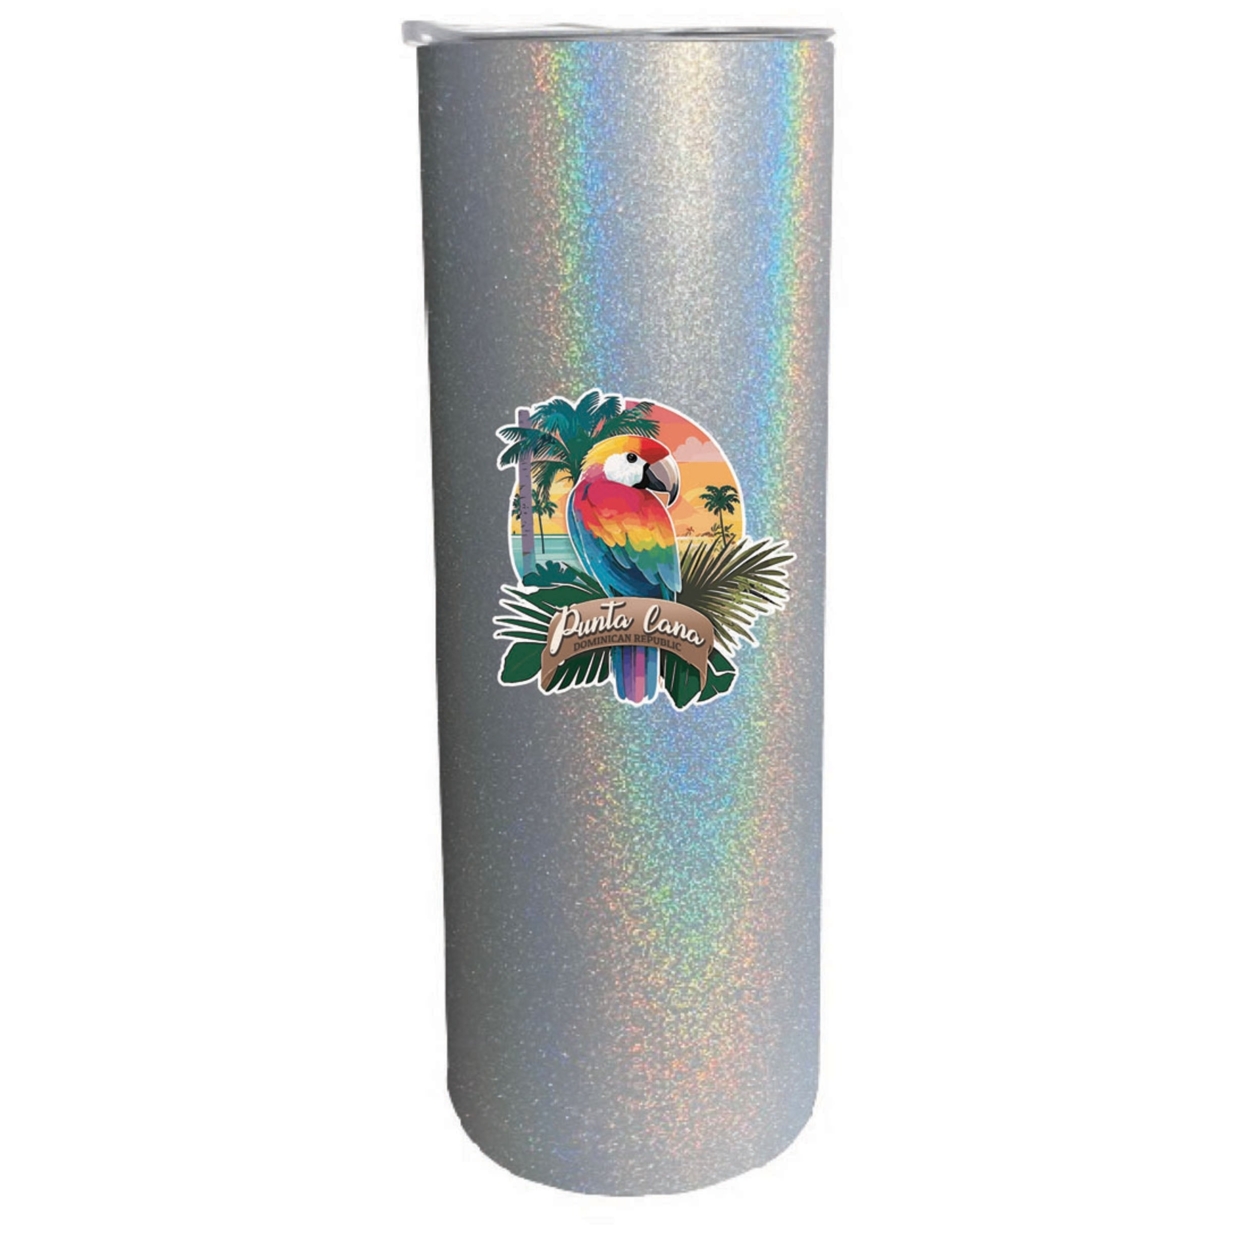 Punta Cana Dominican Republic Souvenir 20 Oz Insulated Stainless Steel Skinny Tumbler - Rainbow Glitter Gray, PARROT